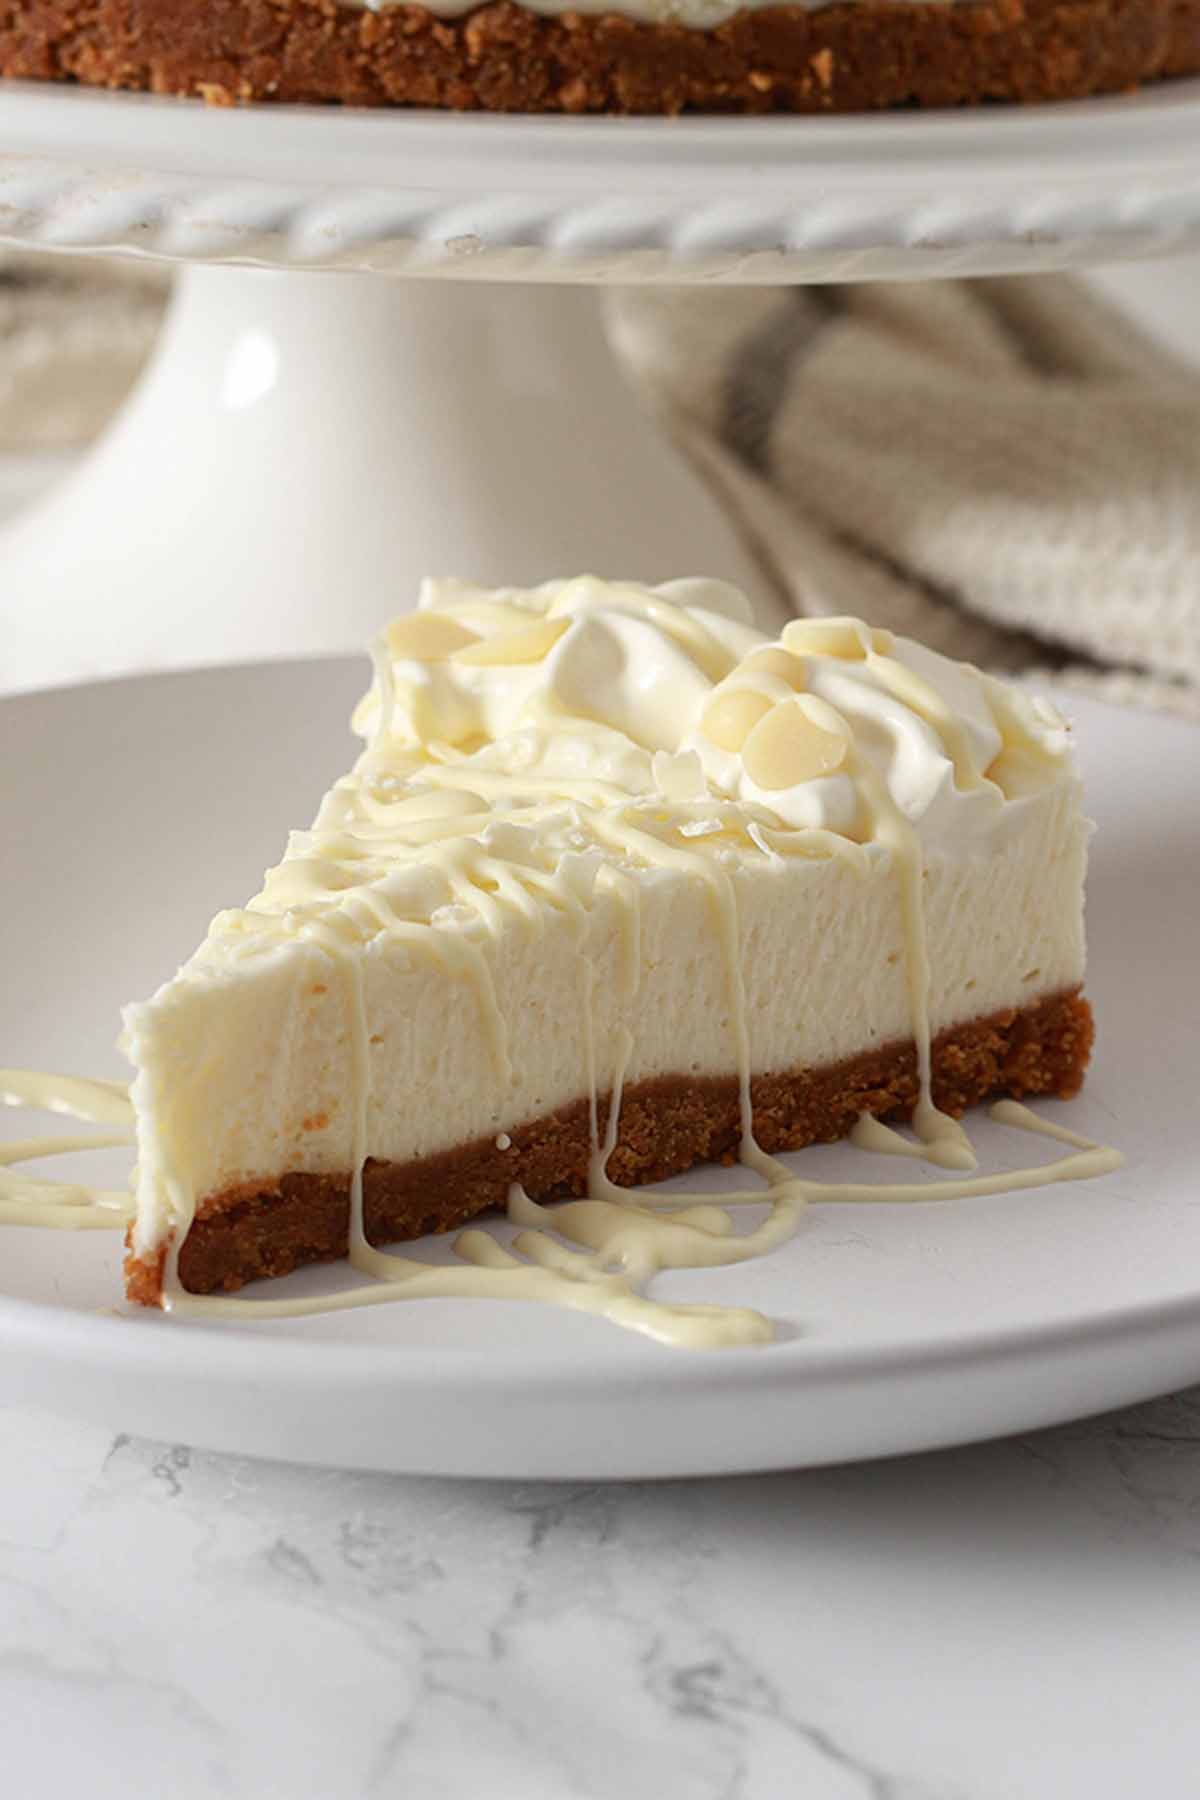 Cheesecake Slice On Plate With White Chocolate Drizzled On Top